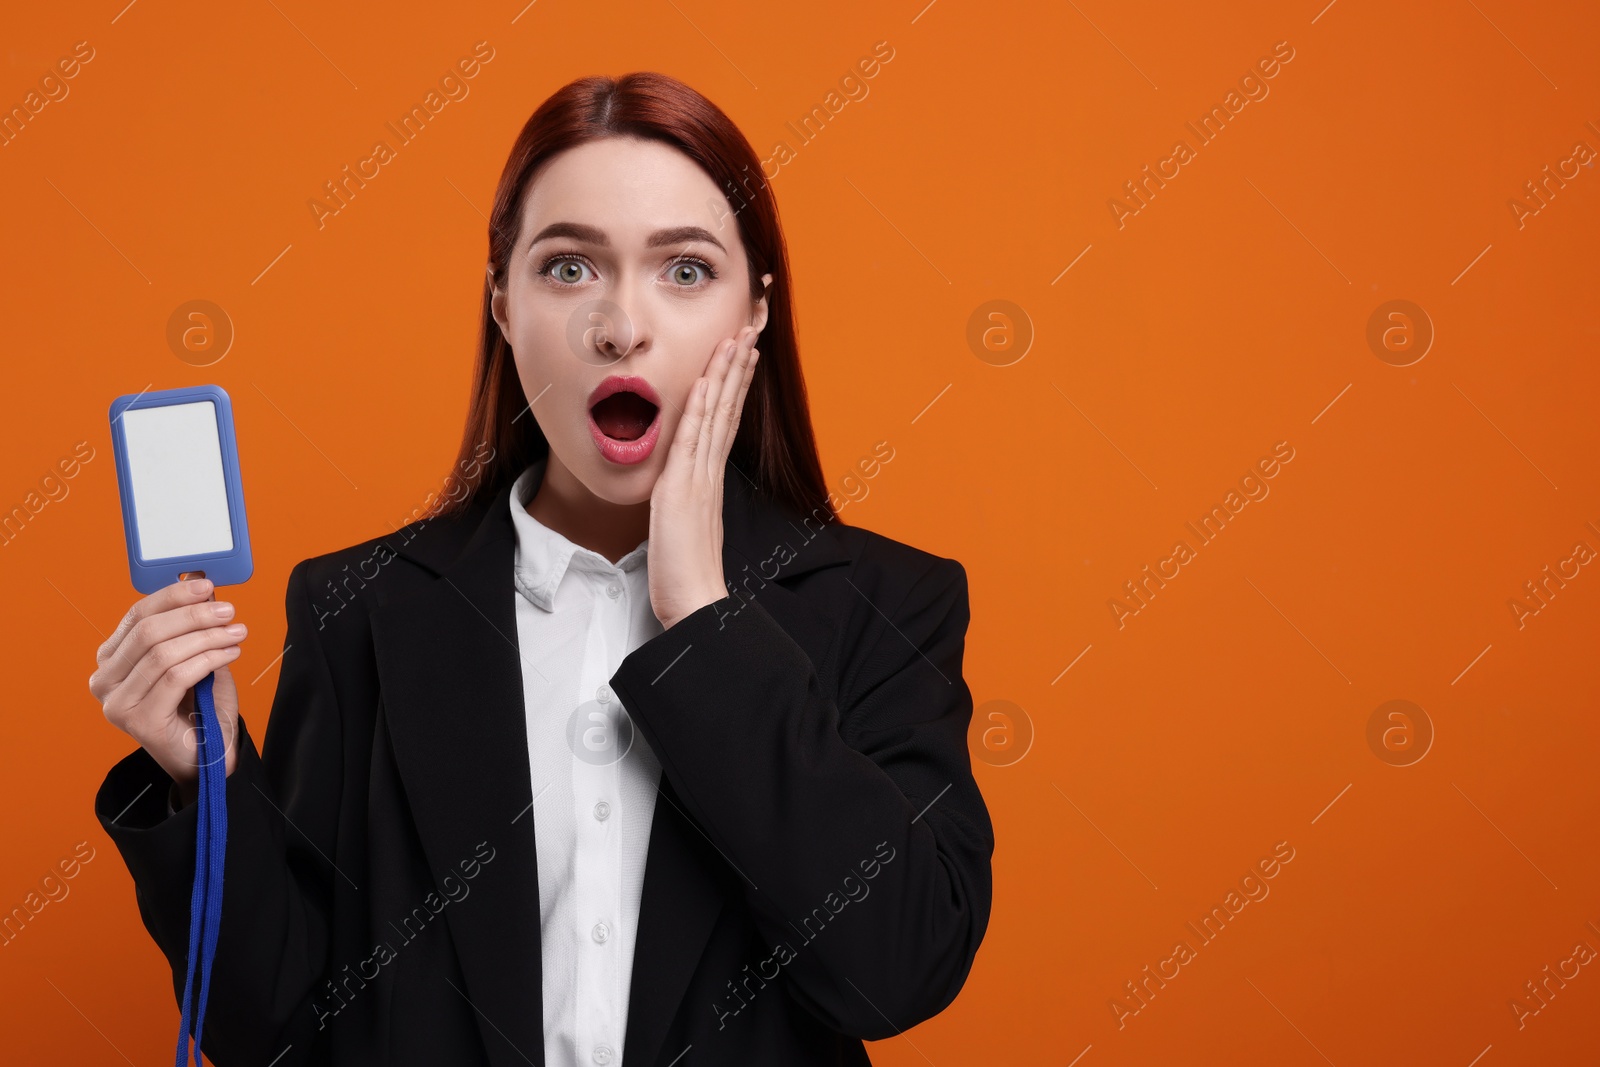 Photo of Shocked woman with vip pass badge on orange background. Space for text